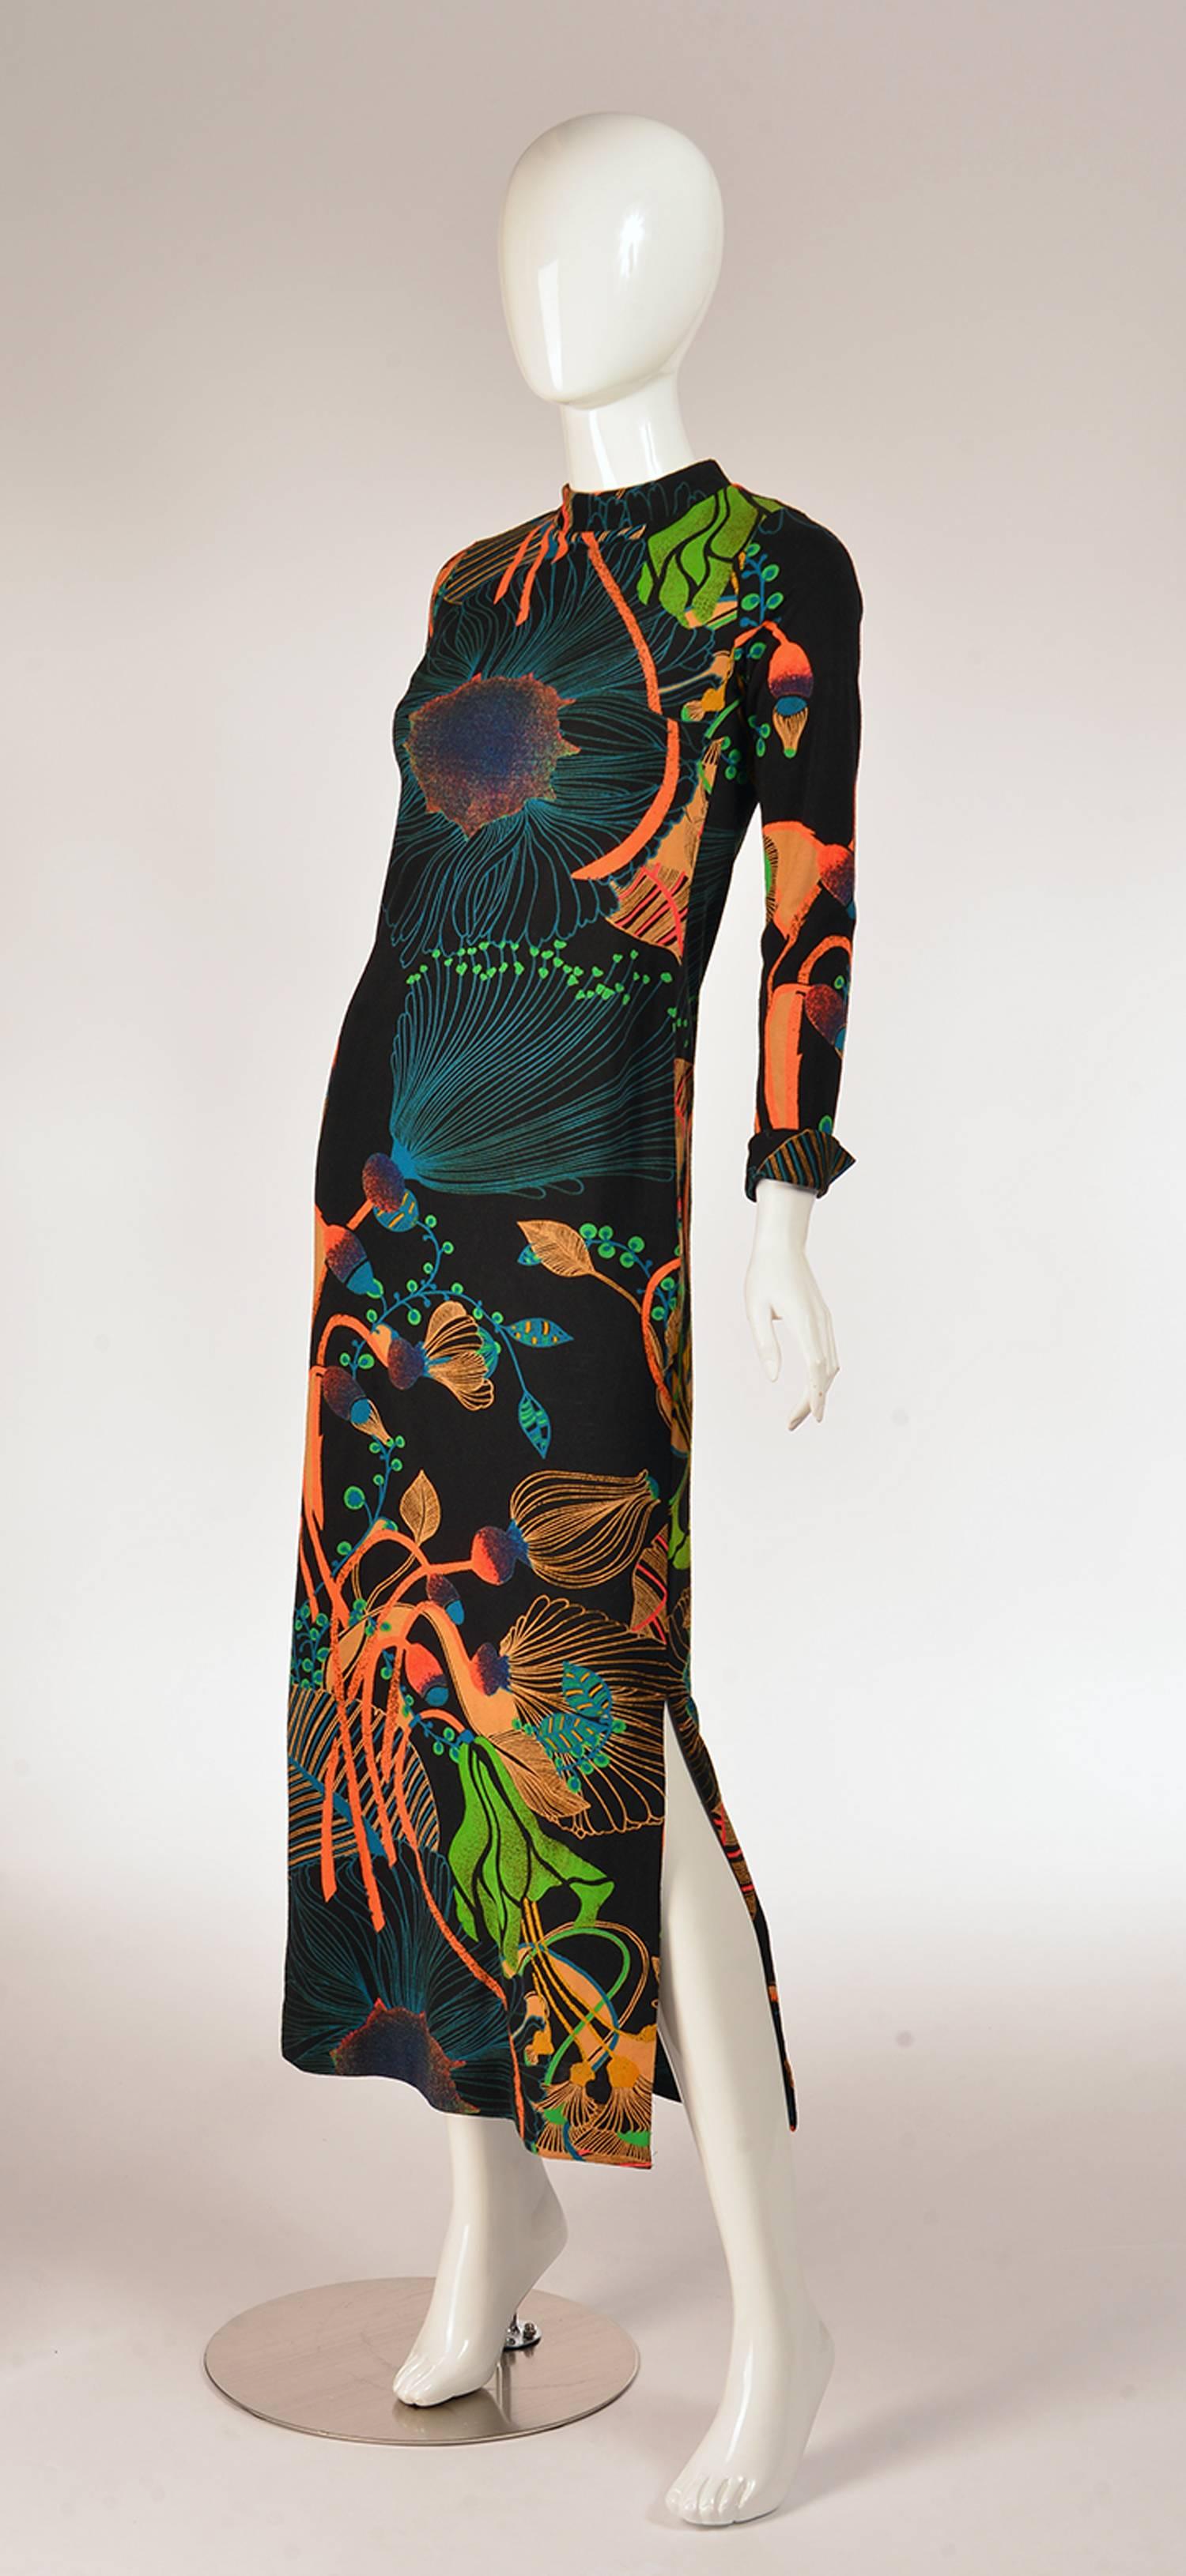 Fascinating 70's Lavin dress. This knit wool dress features a gorgeous, bold neon floral print on black. Vibrant blues, neon orange, leaf greens, blushing pink, walnut, and speckles of purples and reds appear throughout the line-work poppy and lotus